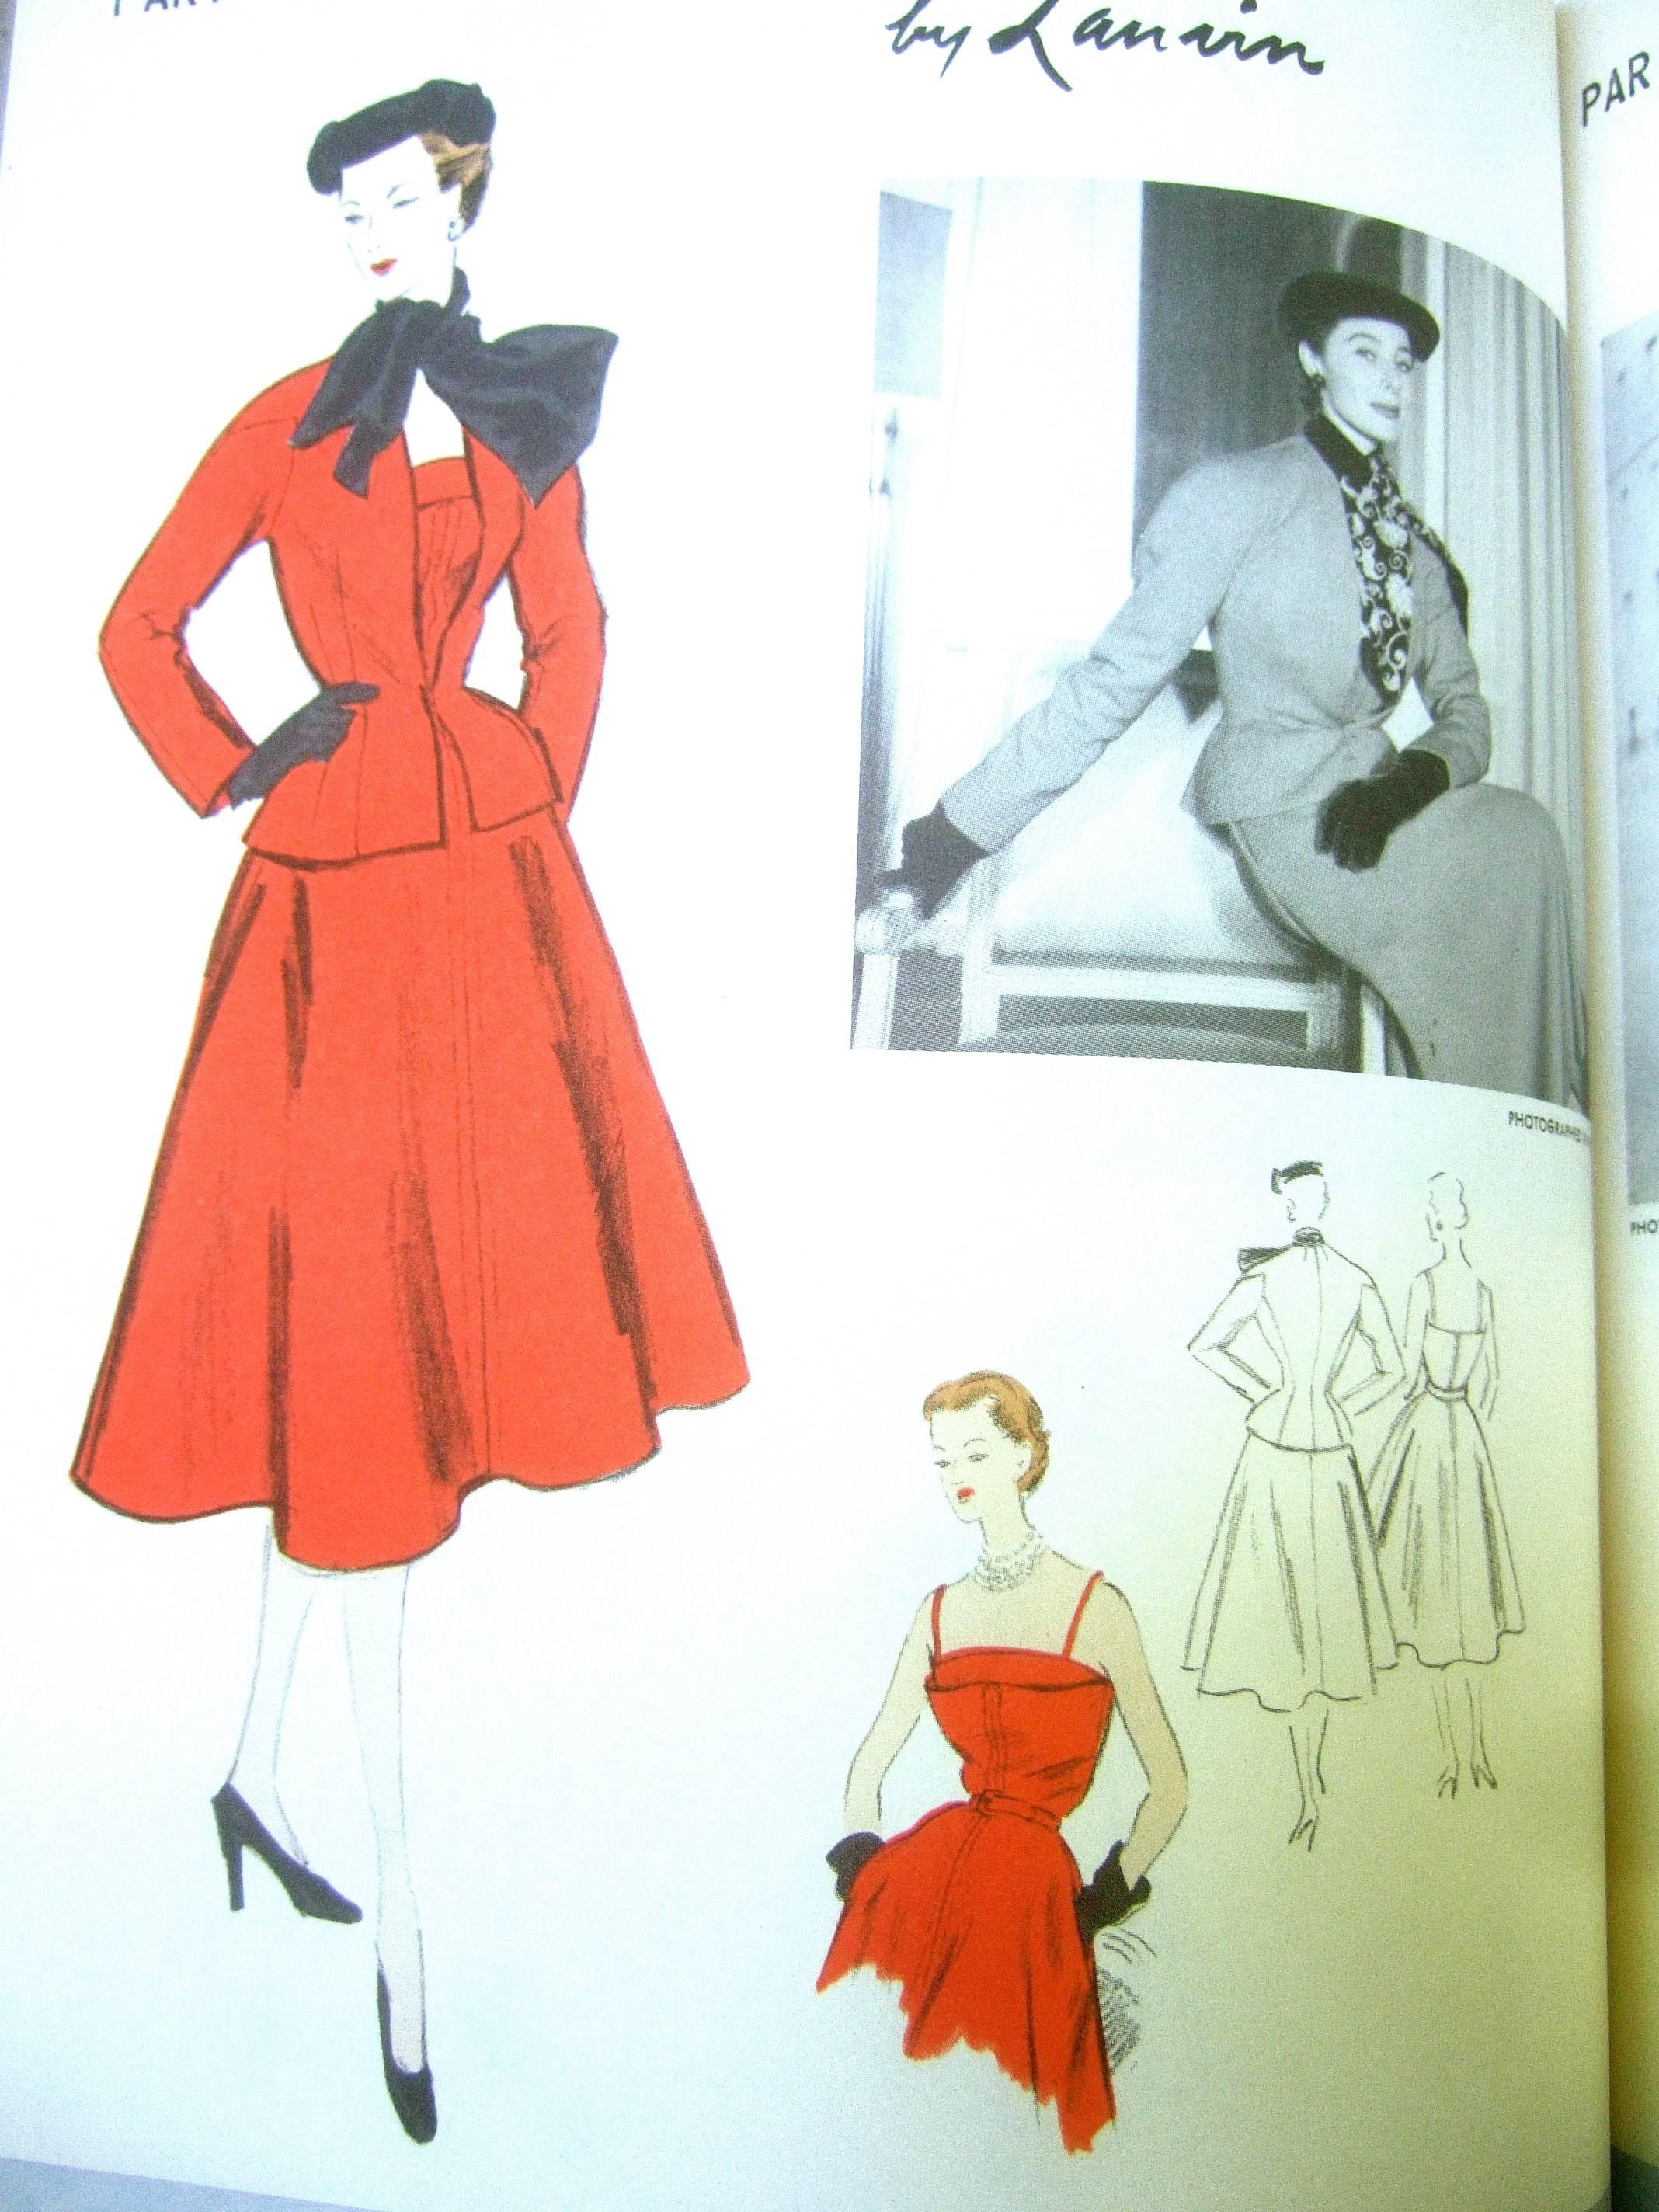 1952 Vogue pattern book with French couture illustrations
The large scale hard bound book is a snap shot of beautiful
illustrated patterns of chic well dressed mid century woman 

Some of the elegant pattern illustrated designs are